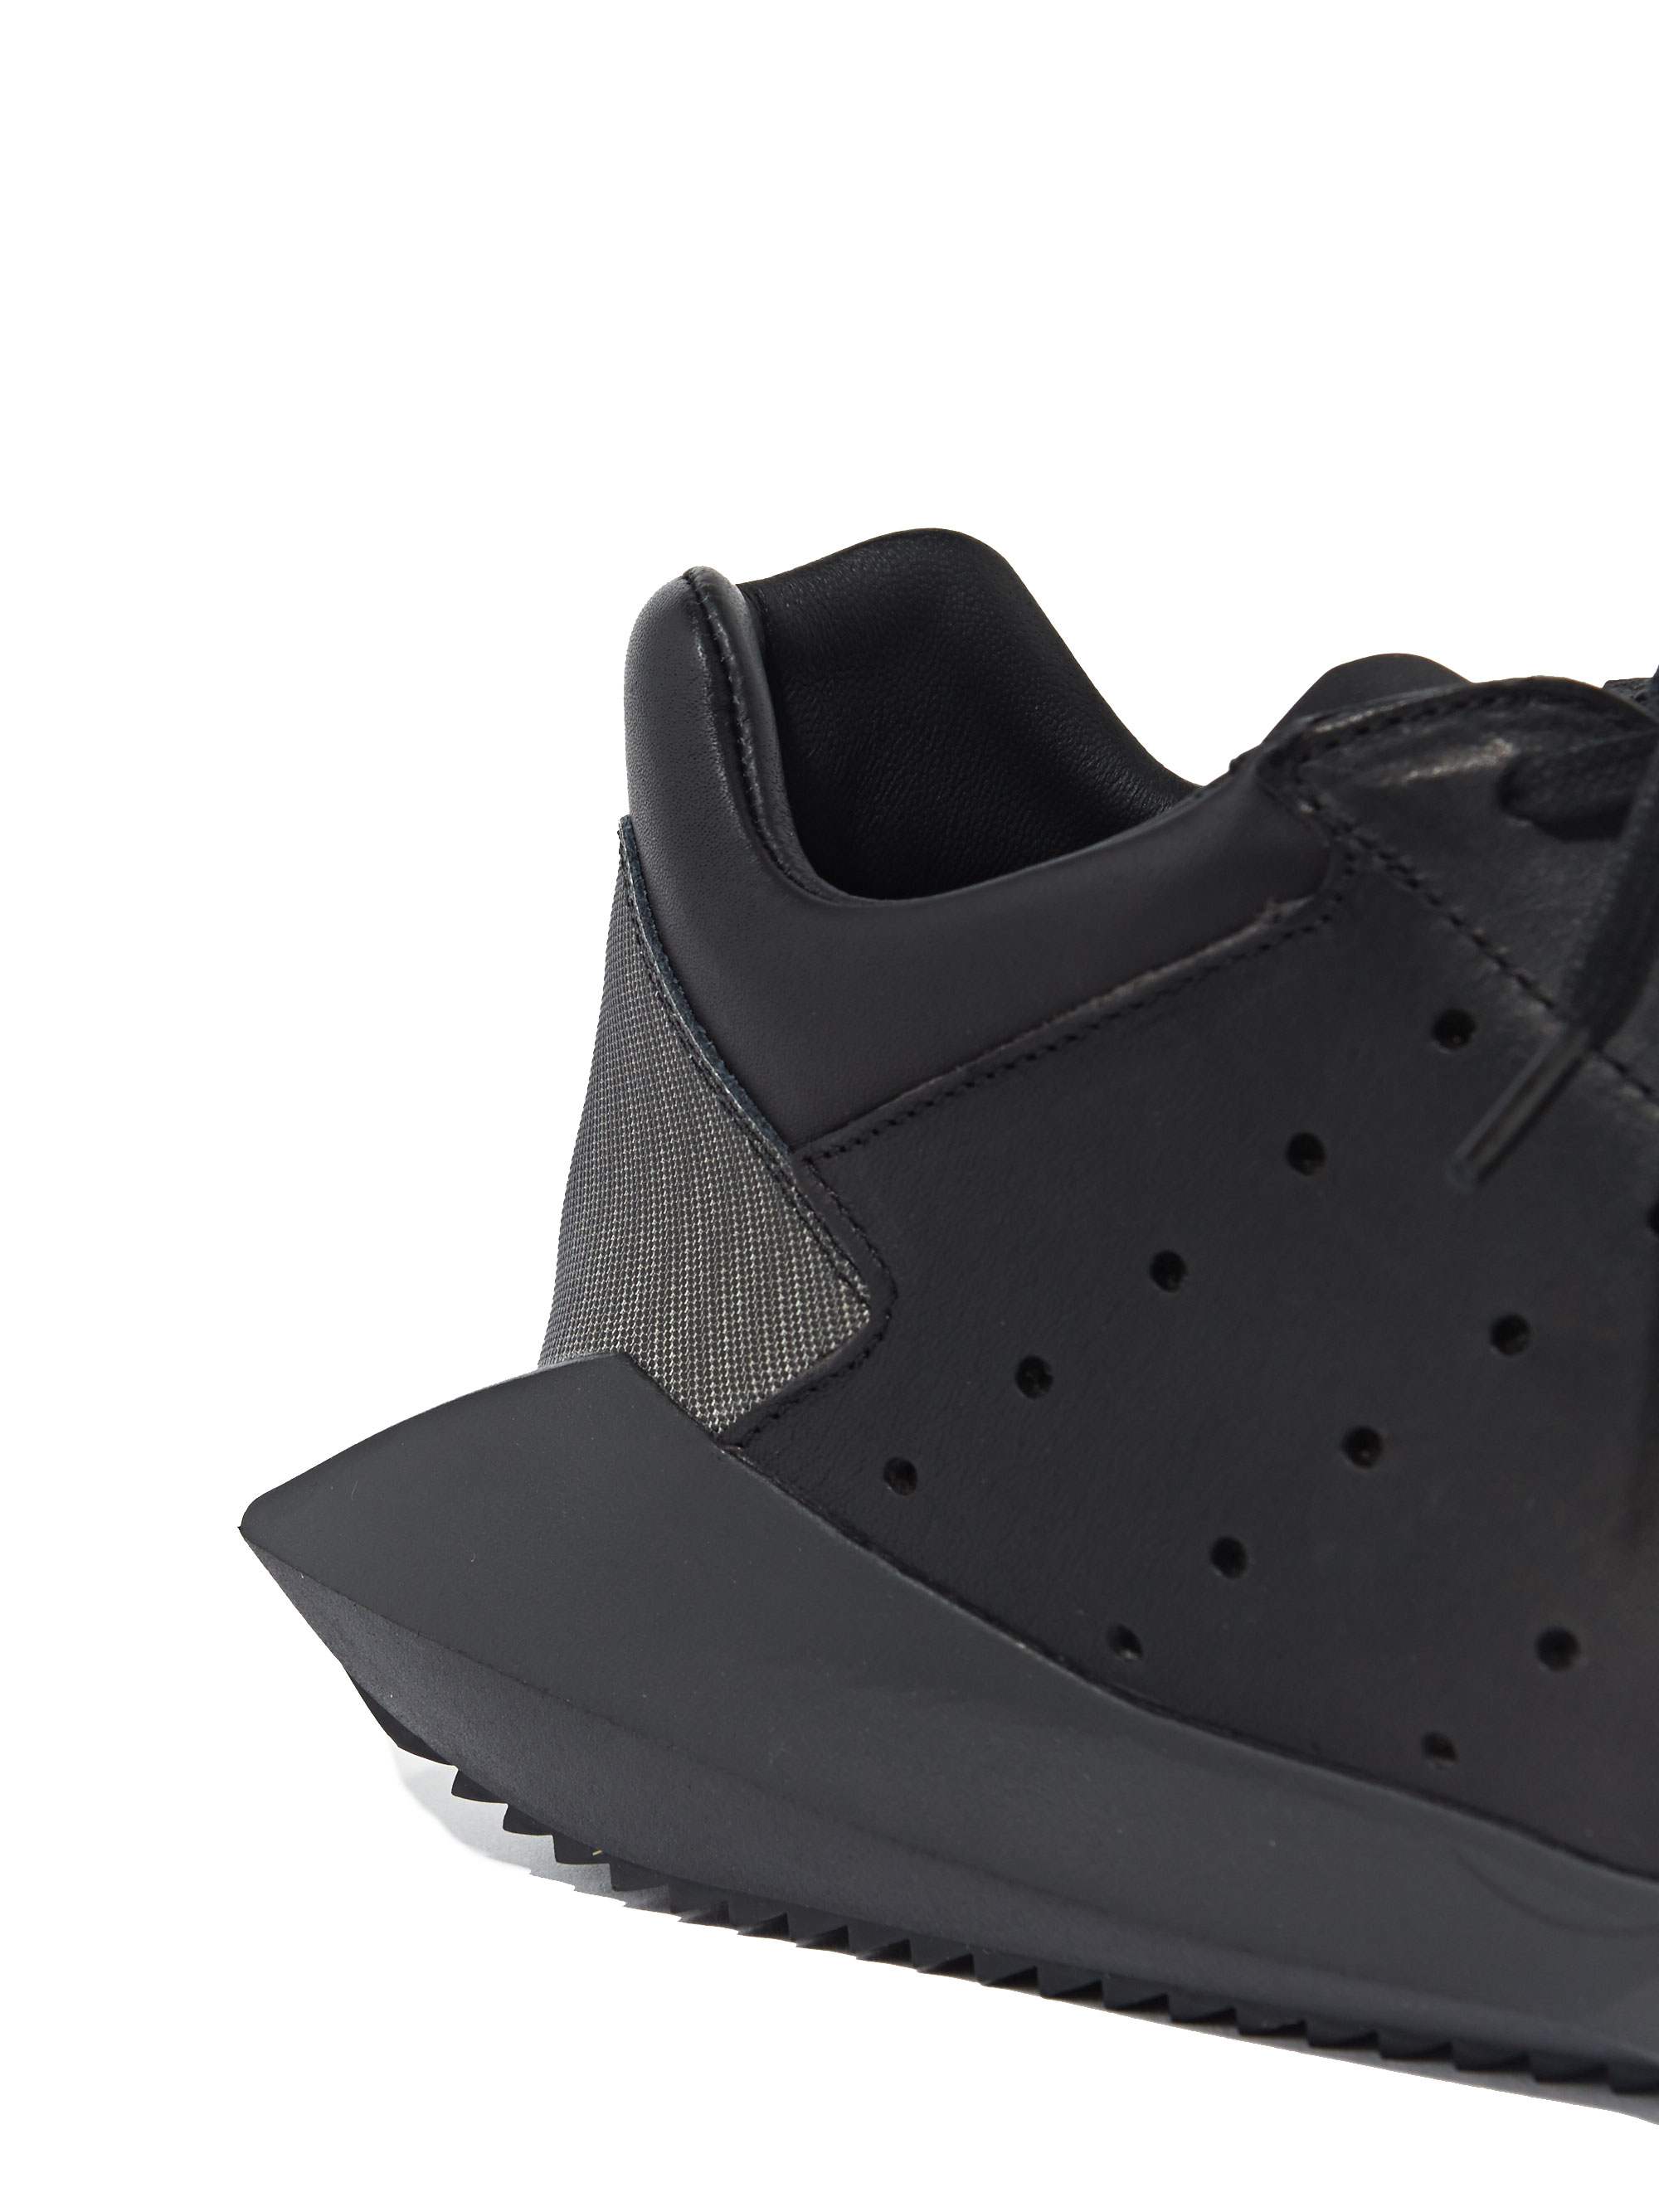 Lyst - Rick Owens Adidas By Mens Tech Runner Trainer in Black for Men